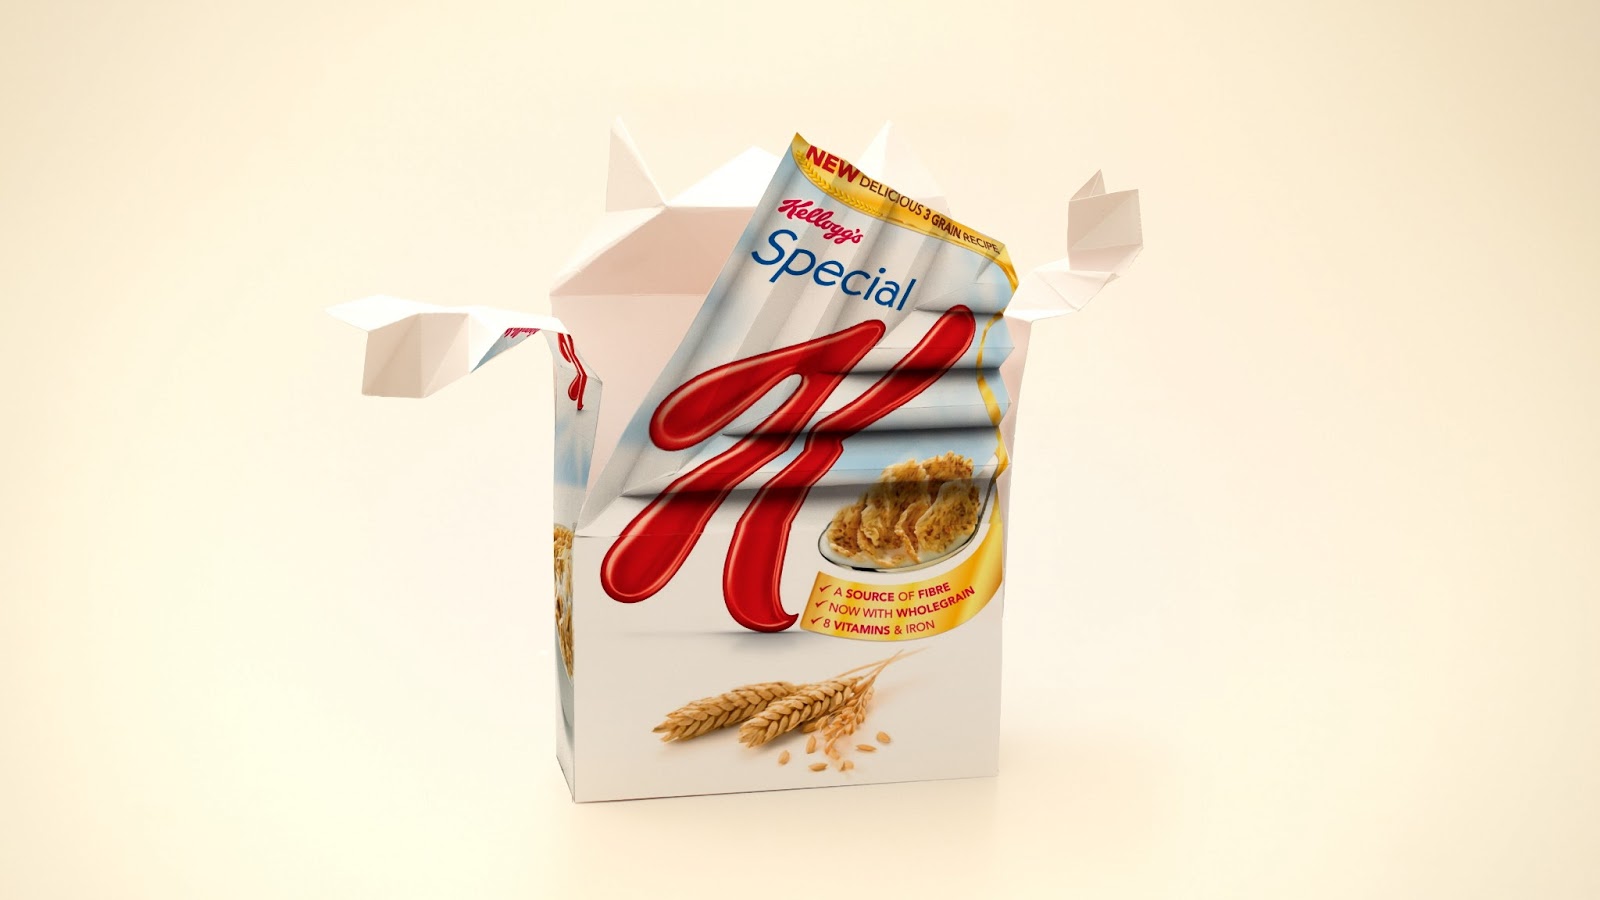 Kellogg’s Special K is launching a new advertising campaign to mark its